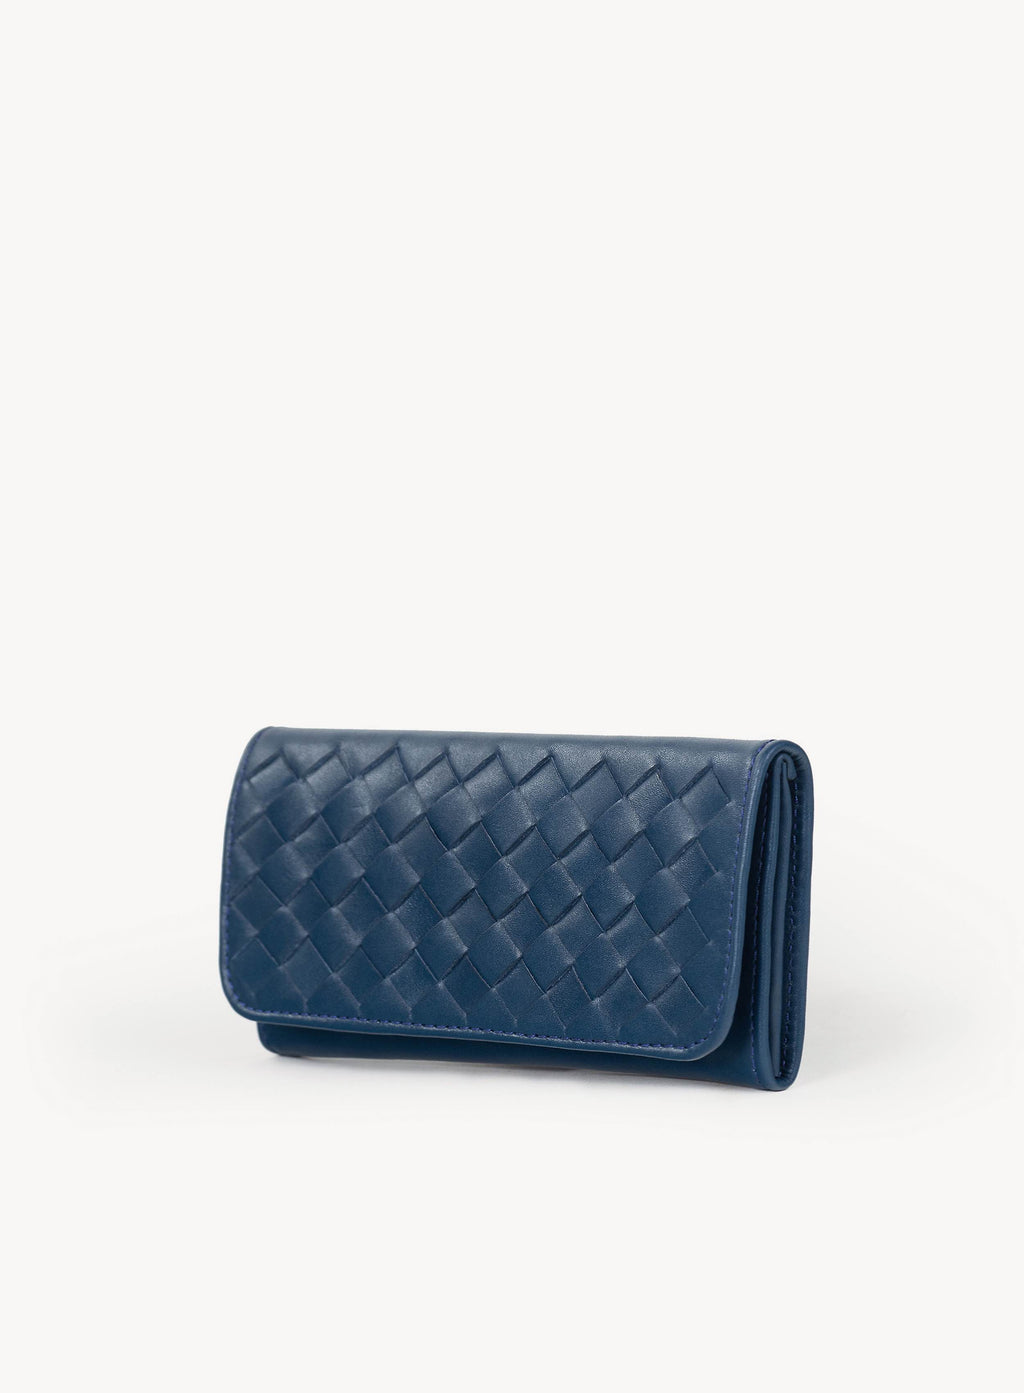 Gucci Long Wallet Women Best Price In Pakistan | Rs 3200 | find the best  quality of Handbags,hand Bag, Hand Bags, Ladies Bags, Side Bags, Clutches,  Leather Bags, Purse, Fashion Bags, Tote